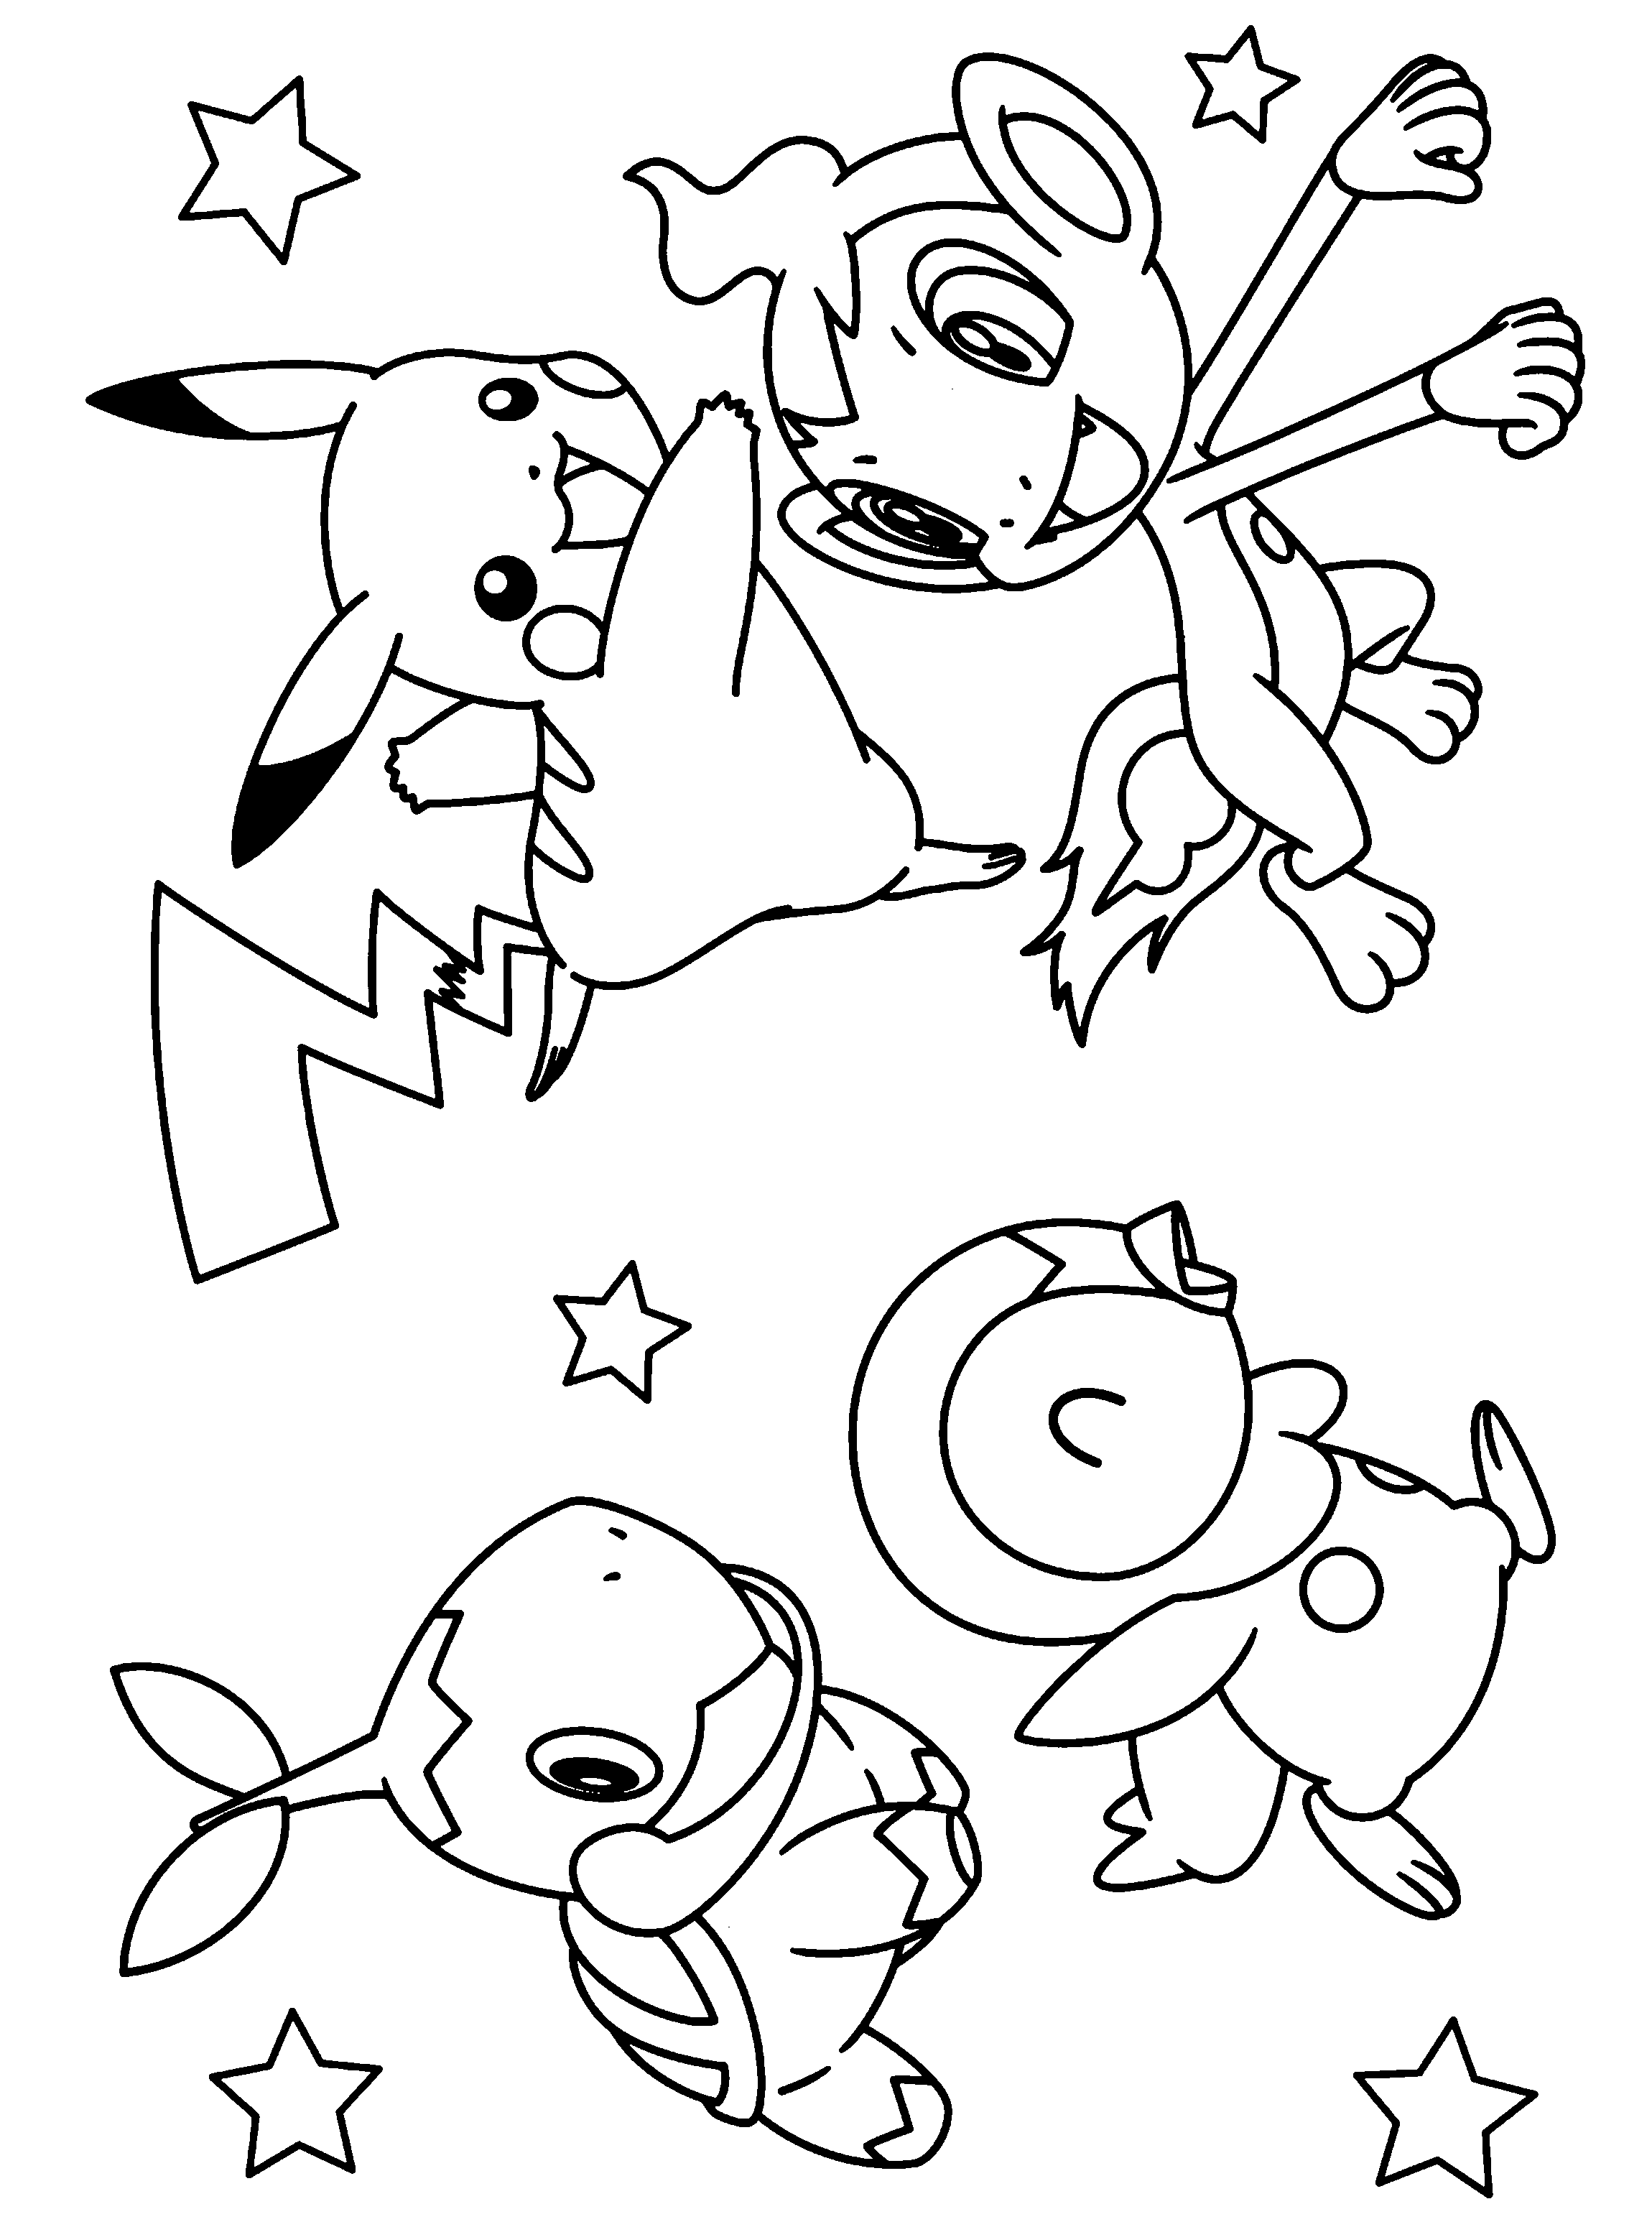 Pokemon Coloring Pages (15) - Coloring Kids